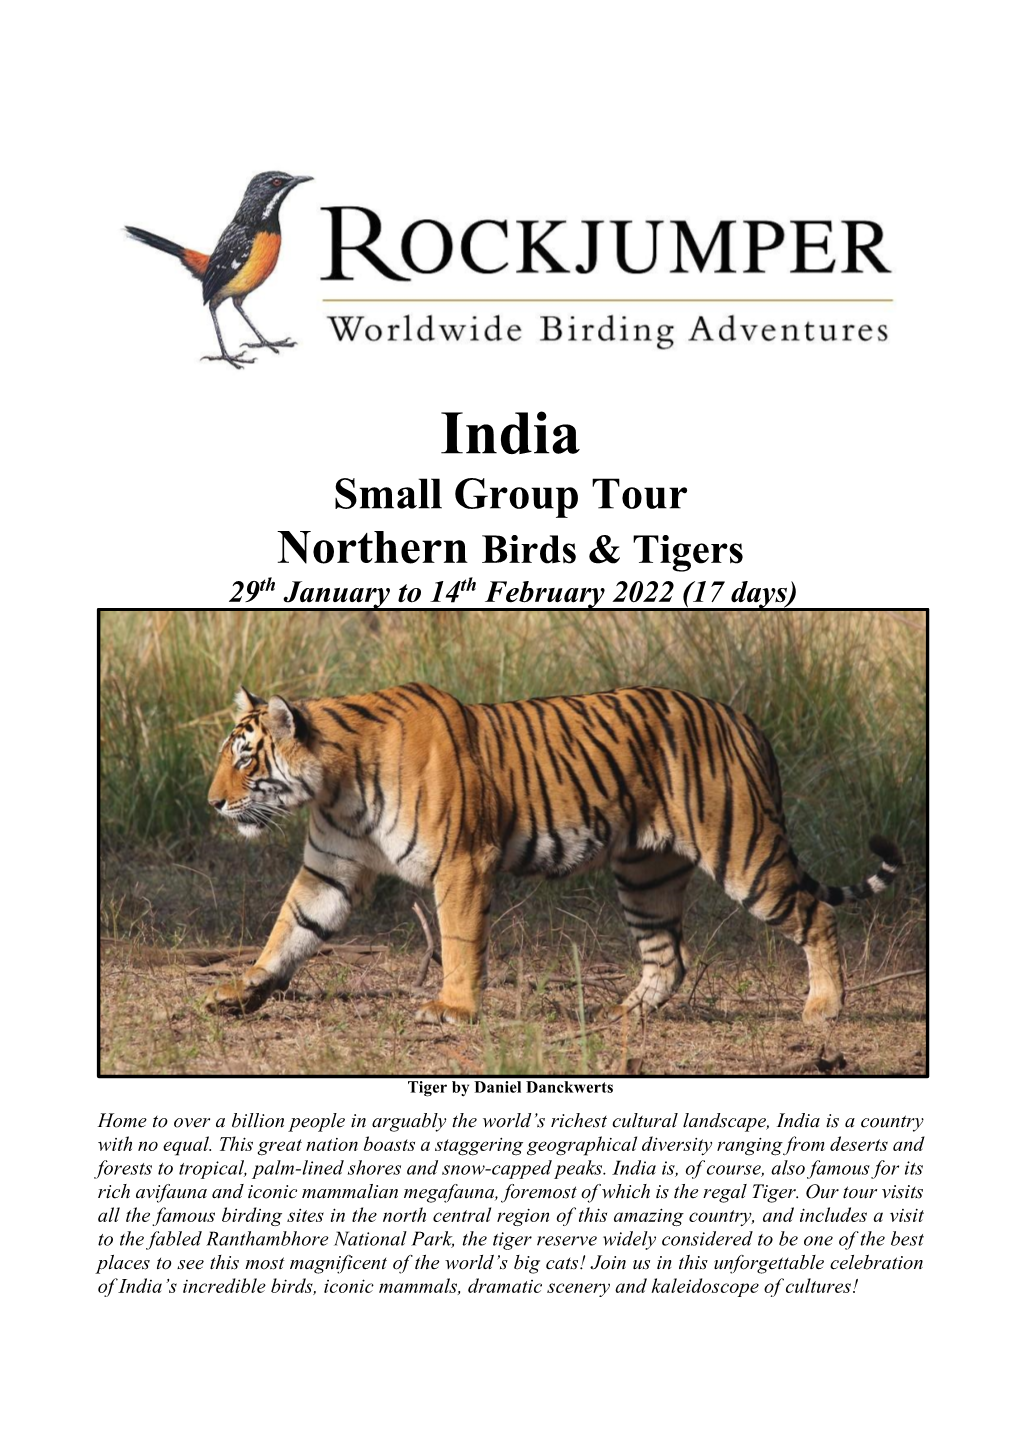 Small Group Tour Northern Birds & Tigers Th Th 29 January to 14 February 2022 (17 Days)